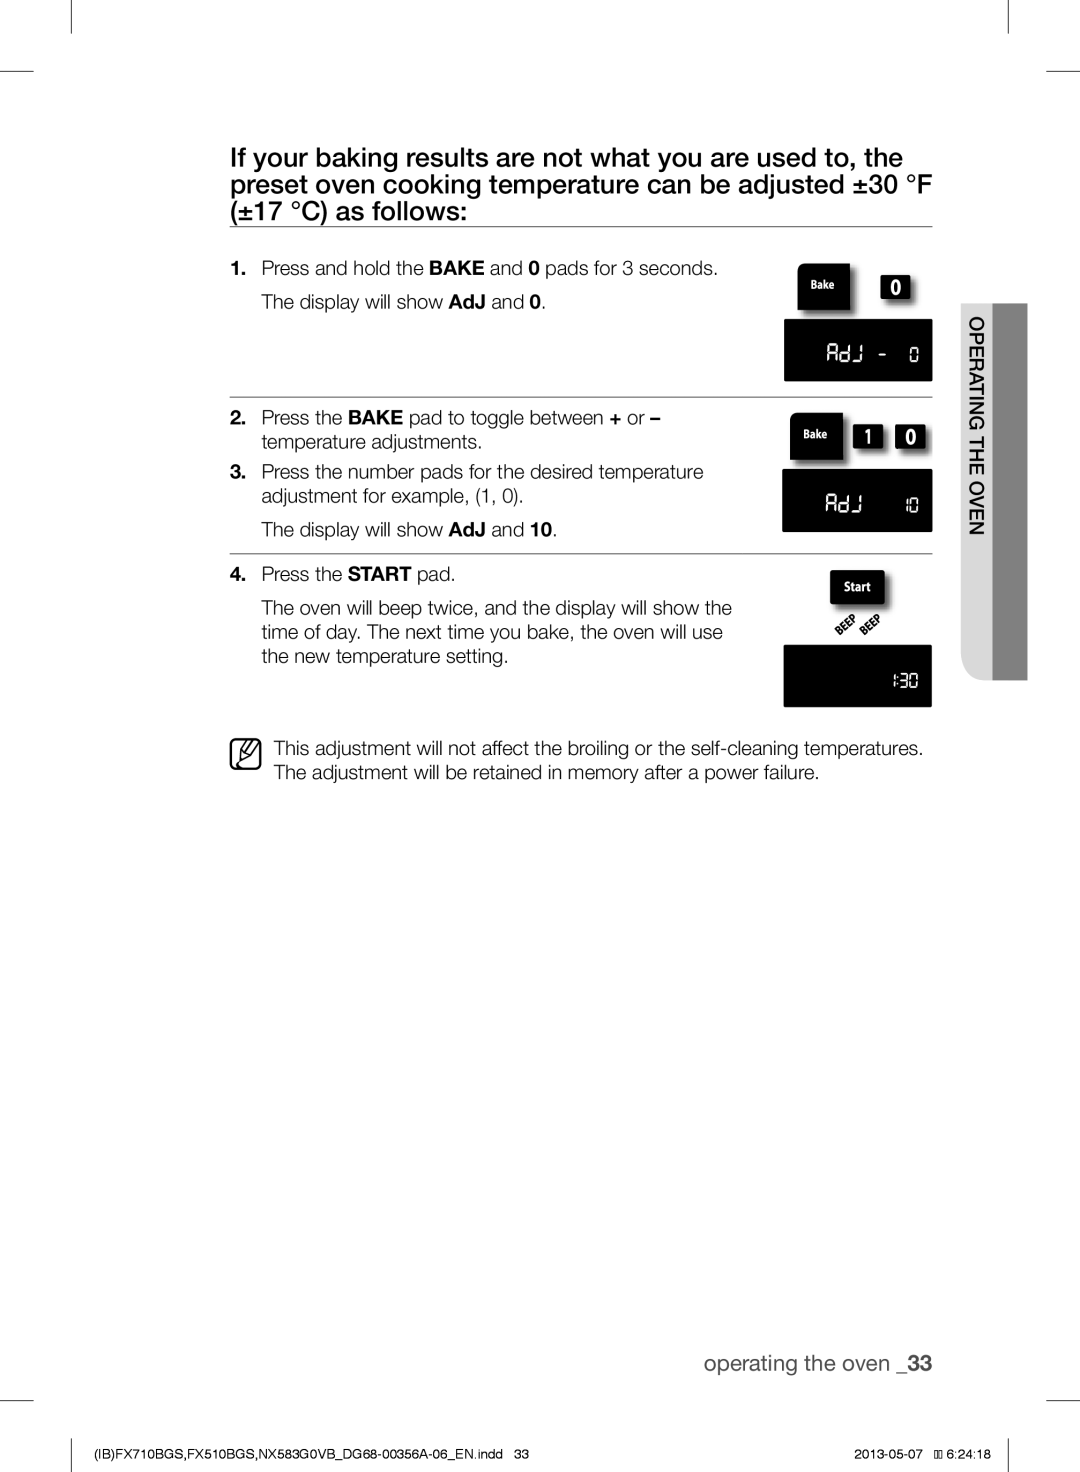 Samsung NX583GOVBSRPKG, NX583GOVBBB, NX583GOVBBPKG, NX583GOVBWWPKG, FX510BGS, FX710BGS user manual operating the oven 